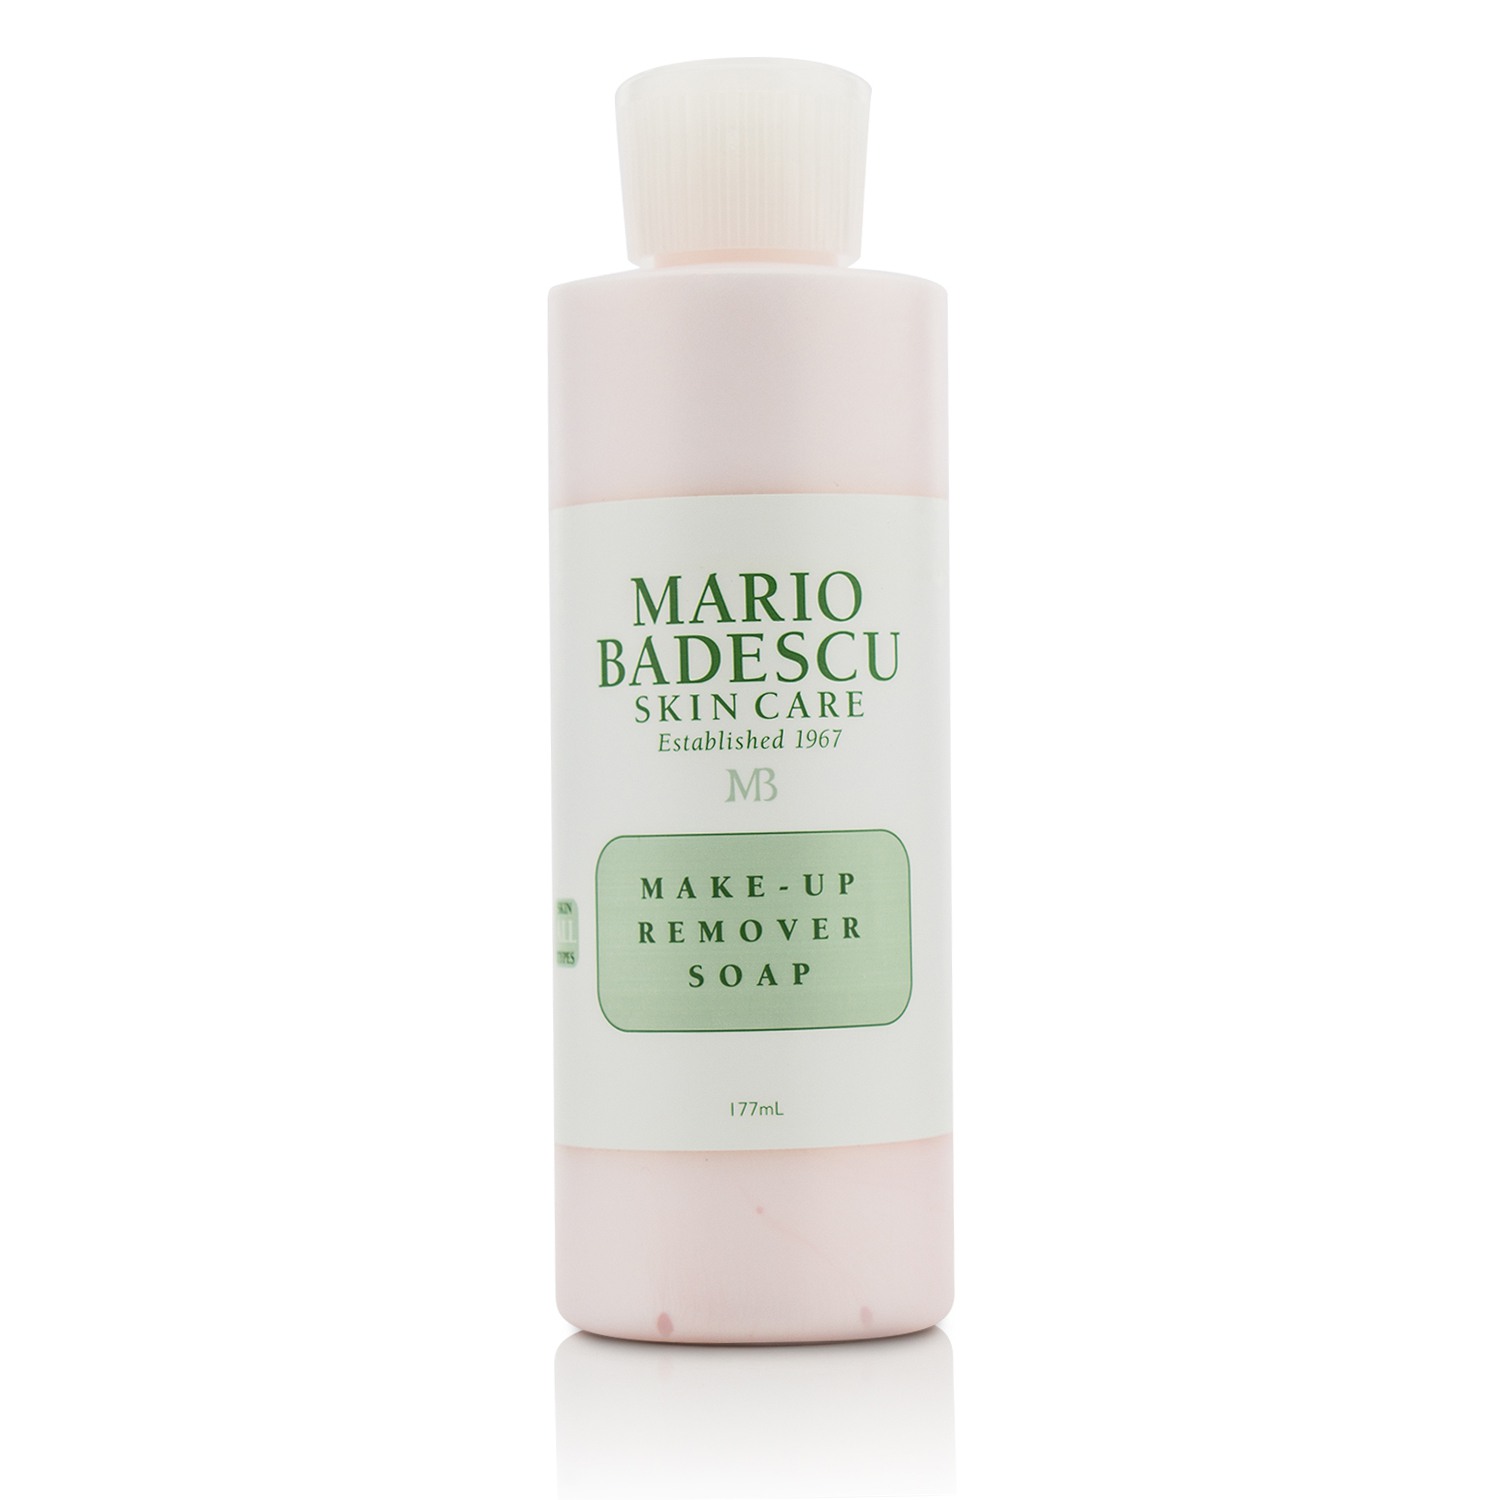 Make-Up Remover Soap - For All Skin Types Mario Badescu Image